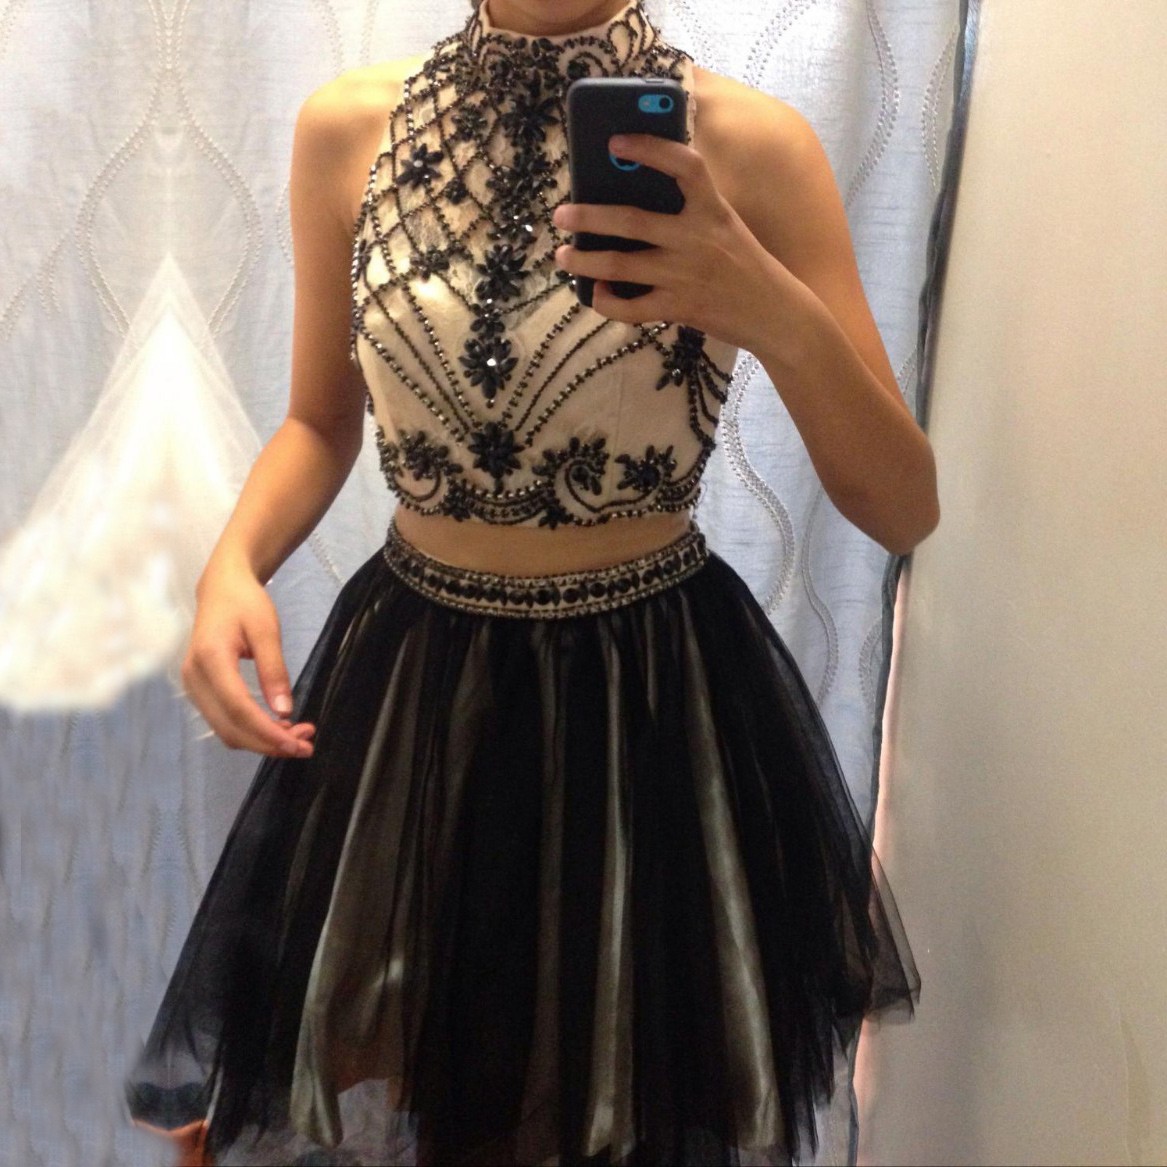 Sexy Two Piece High Neck Short Black Homecoming Dress with Beading Rhinestones